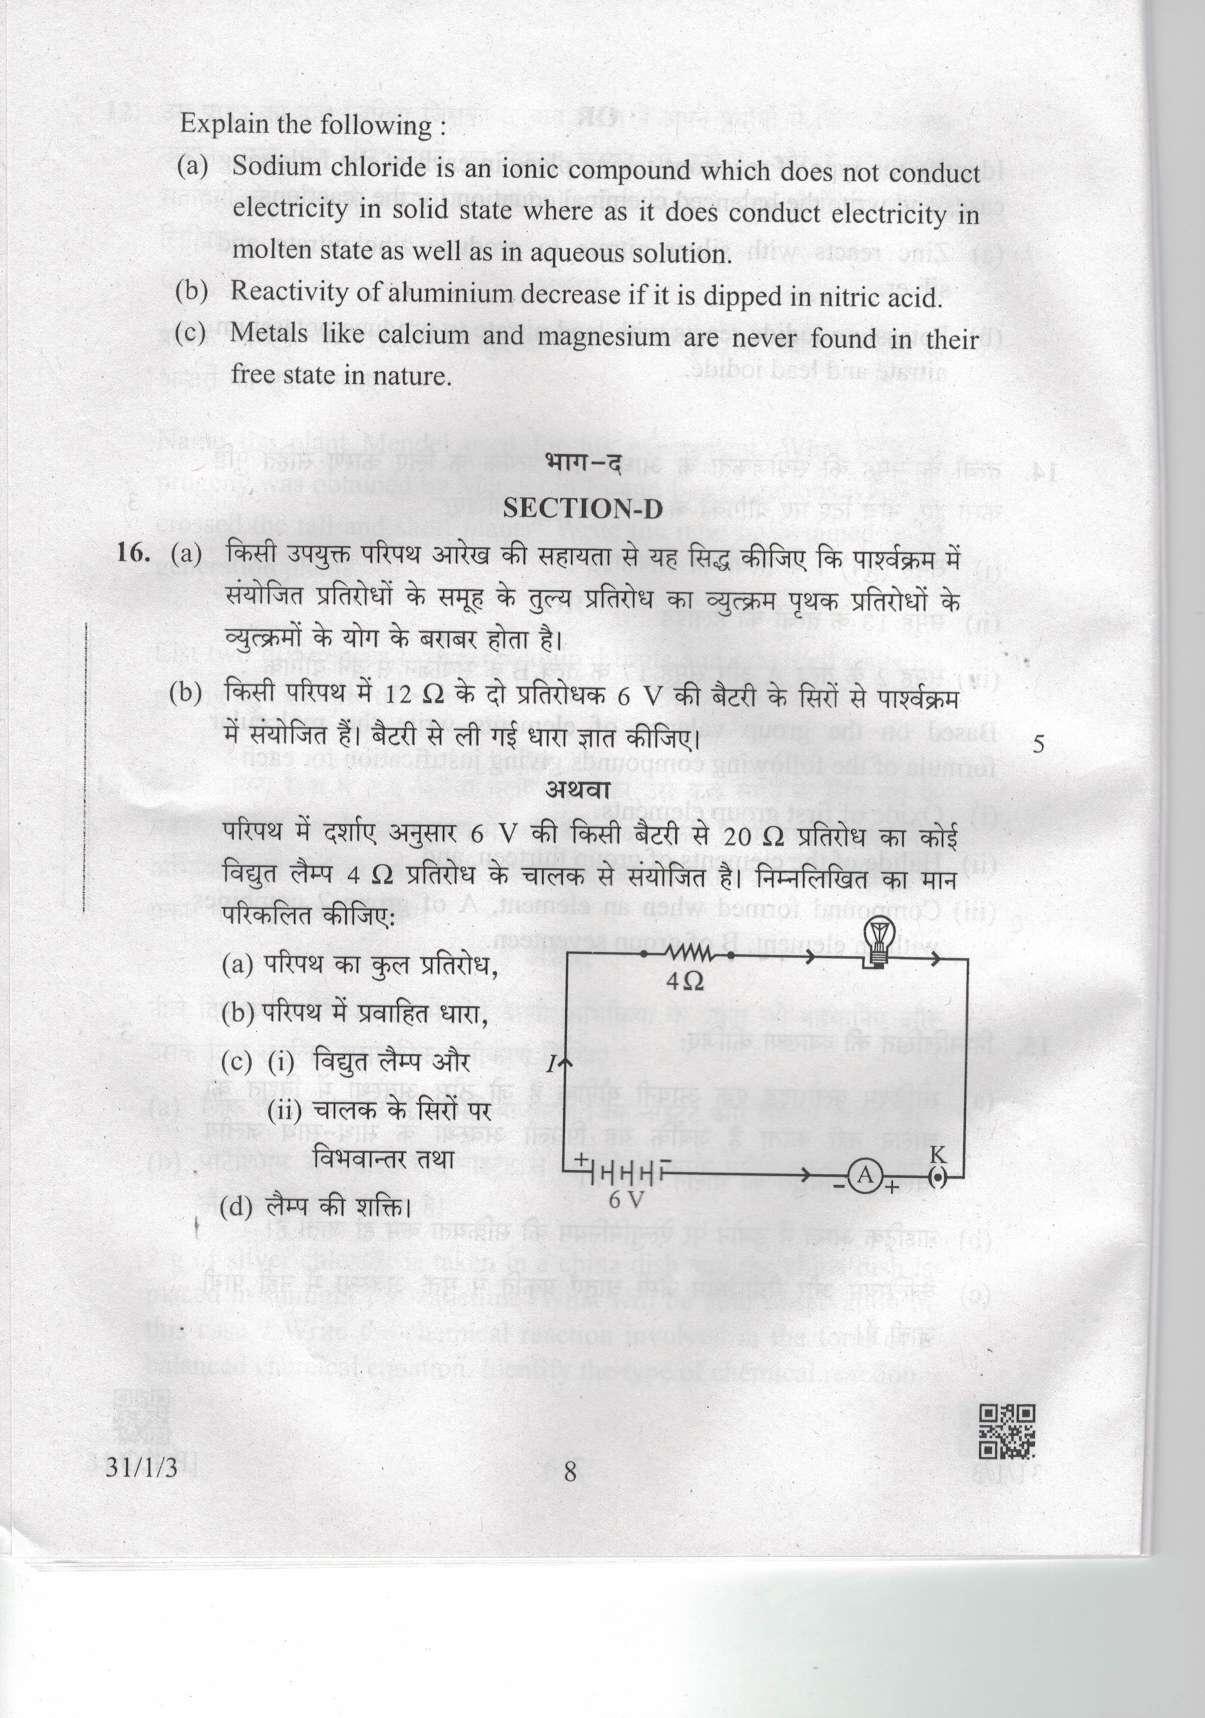 CBSE Class 10 31-1-3 Science 2019 Question Paper - Page 8